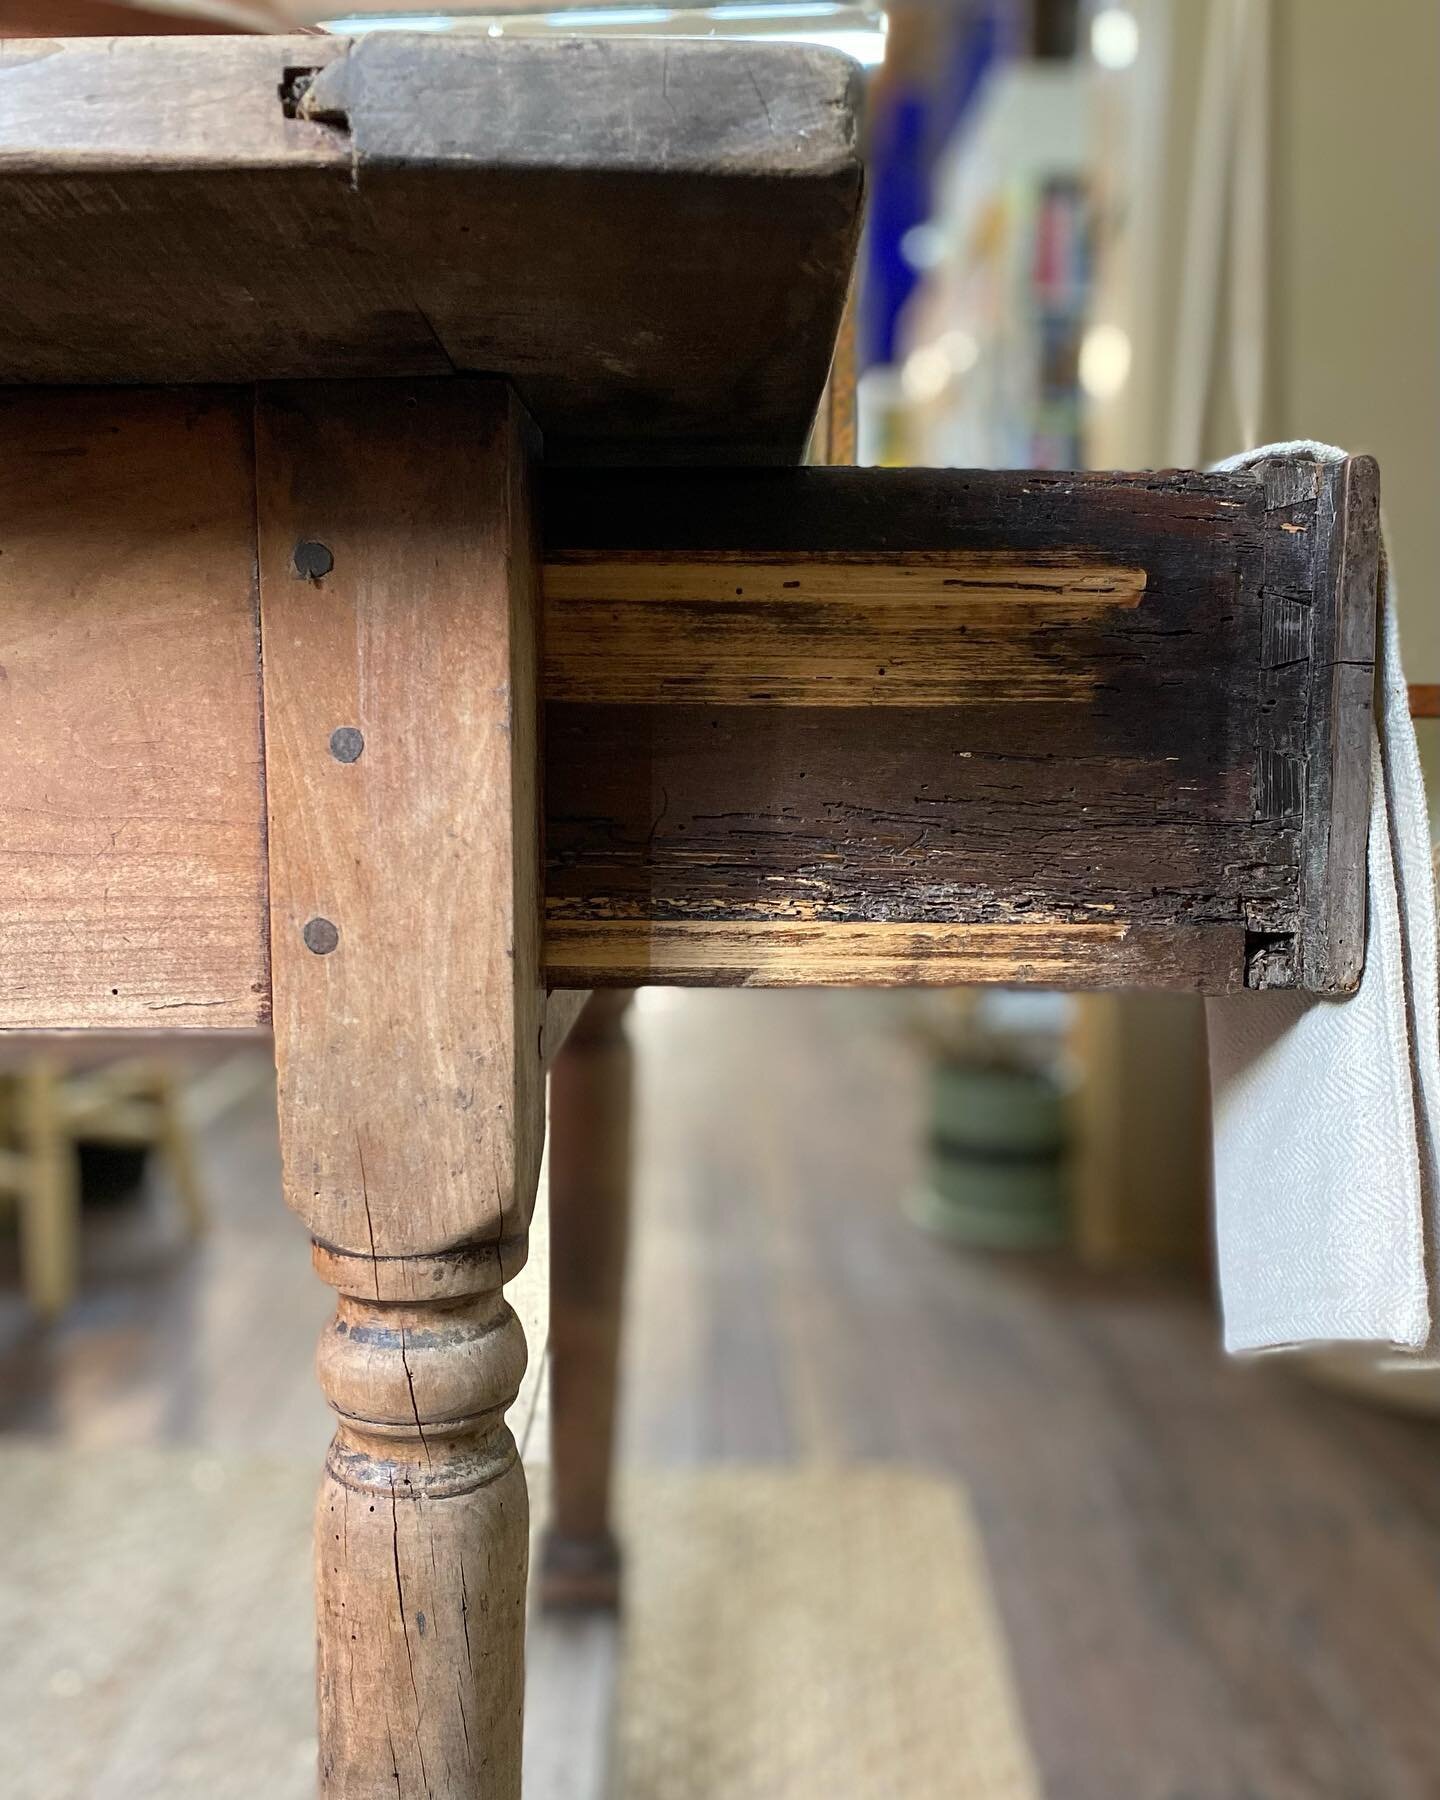 Just arrived
In The Stillroom
@empire.revival and online this evening.

Fabulous 19th century French oak refectory table.  Covered with worm holes and other signs of age we love; every mark telling a story of a well loved life.  Two functional drawer